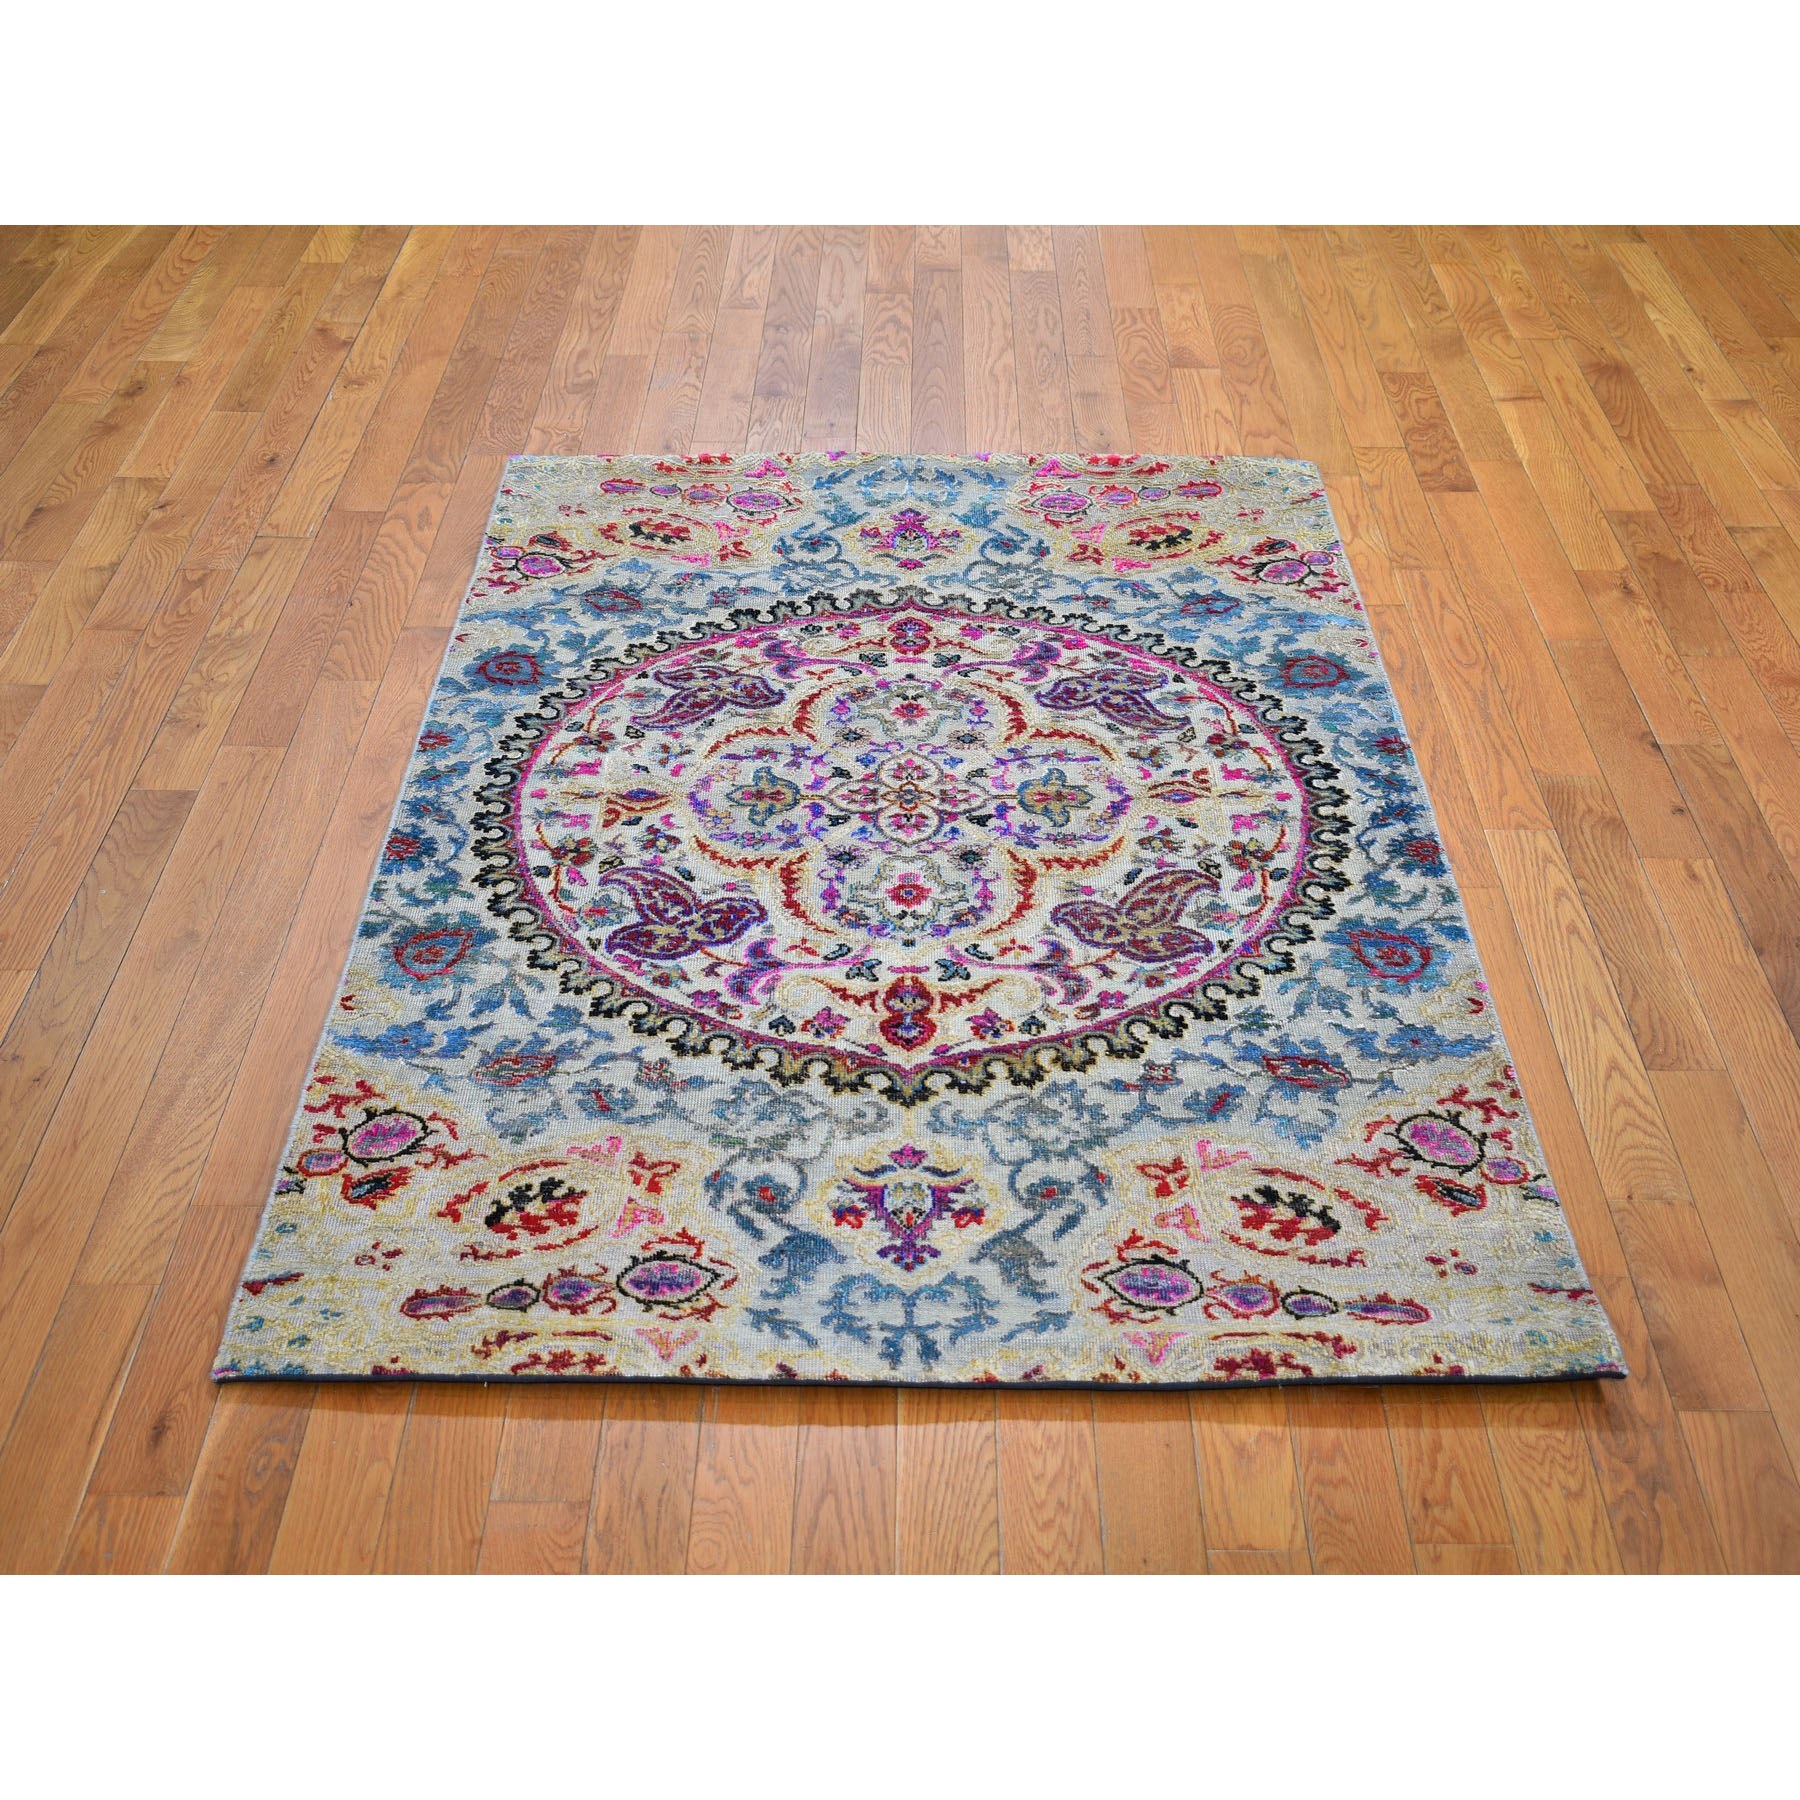 4-x6- Sari Silk and Textured Wool Colorful Maharaja Design Hand Knotted Oriental Rug 